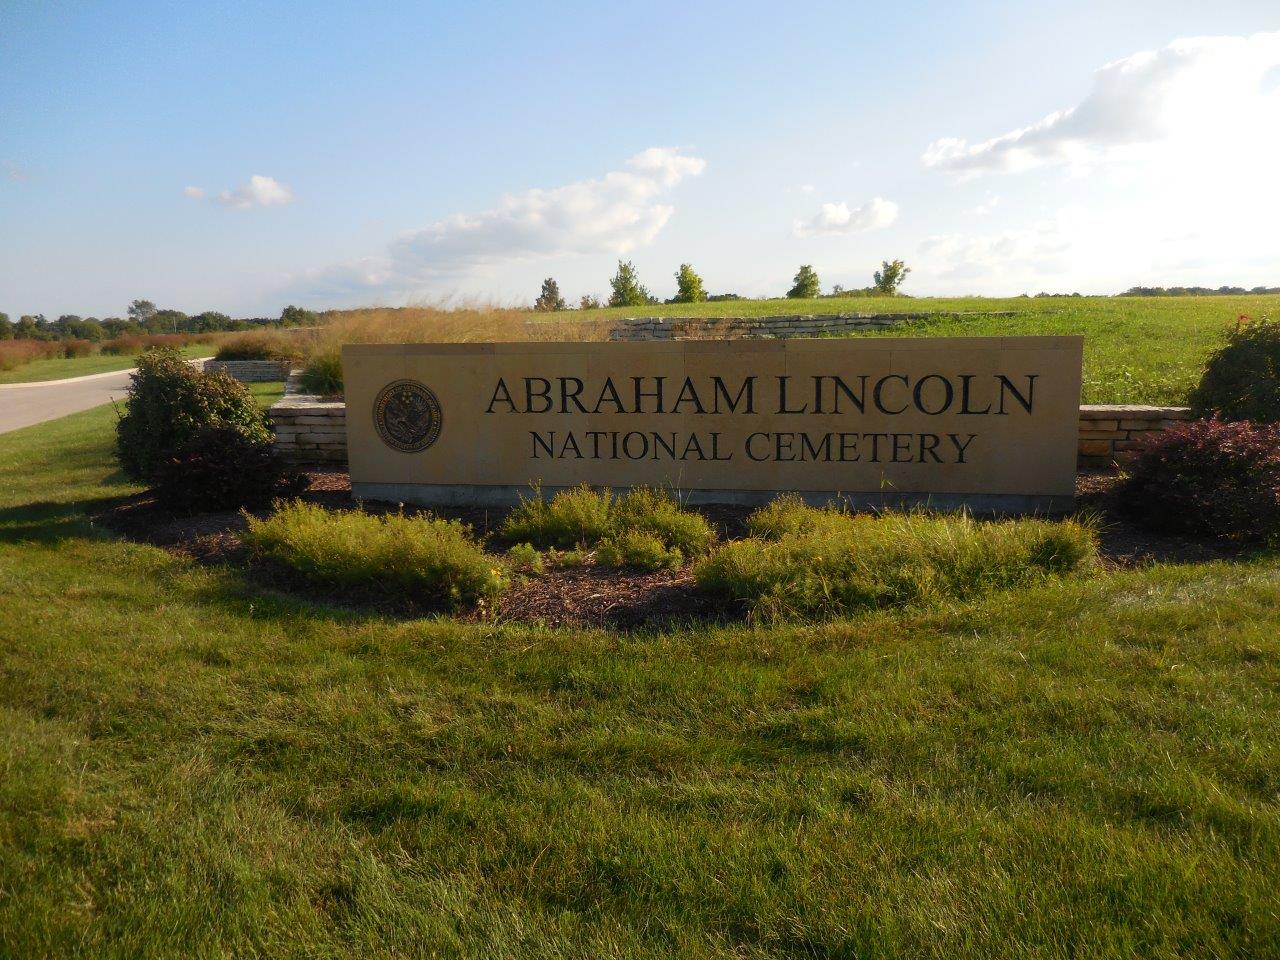 Abraham Lincoln statue at Abraham Lincoln National Cemetery